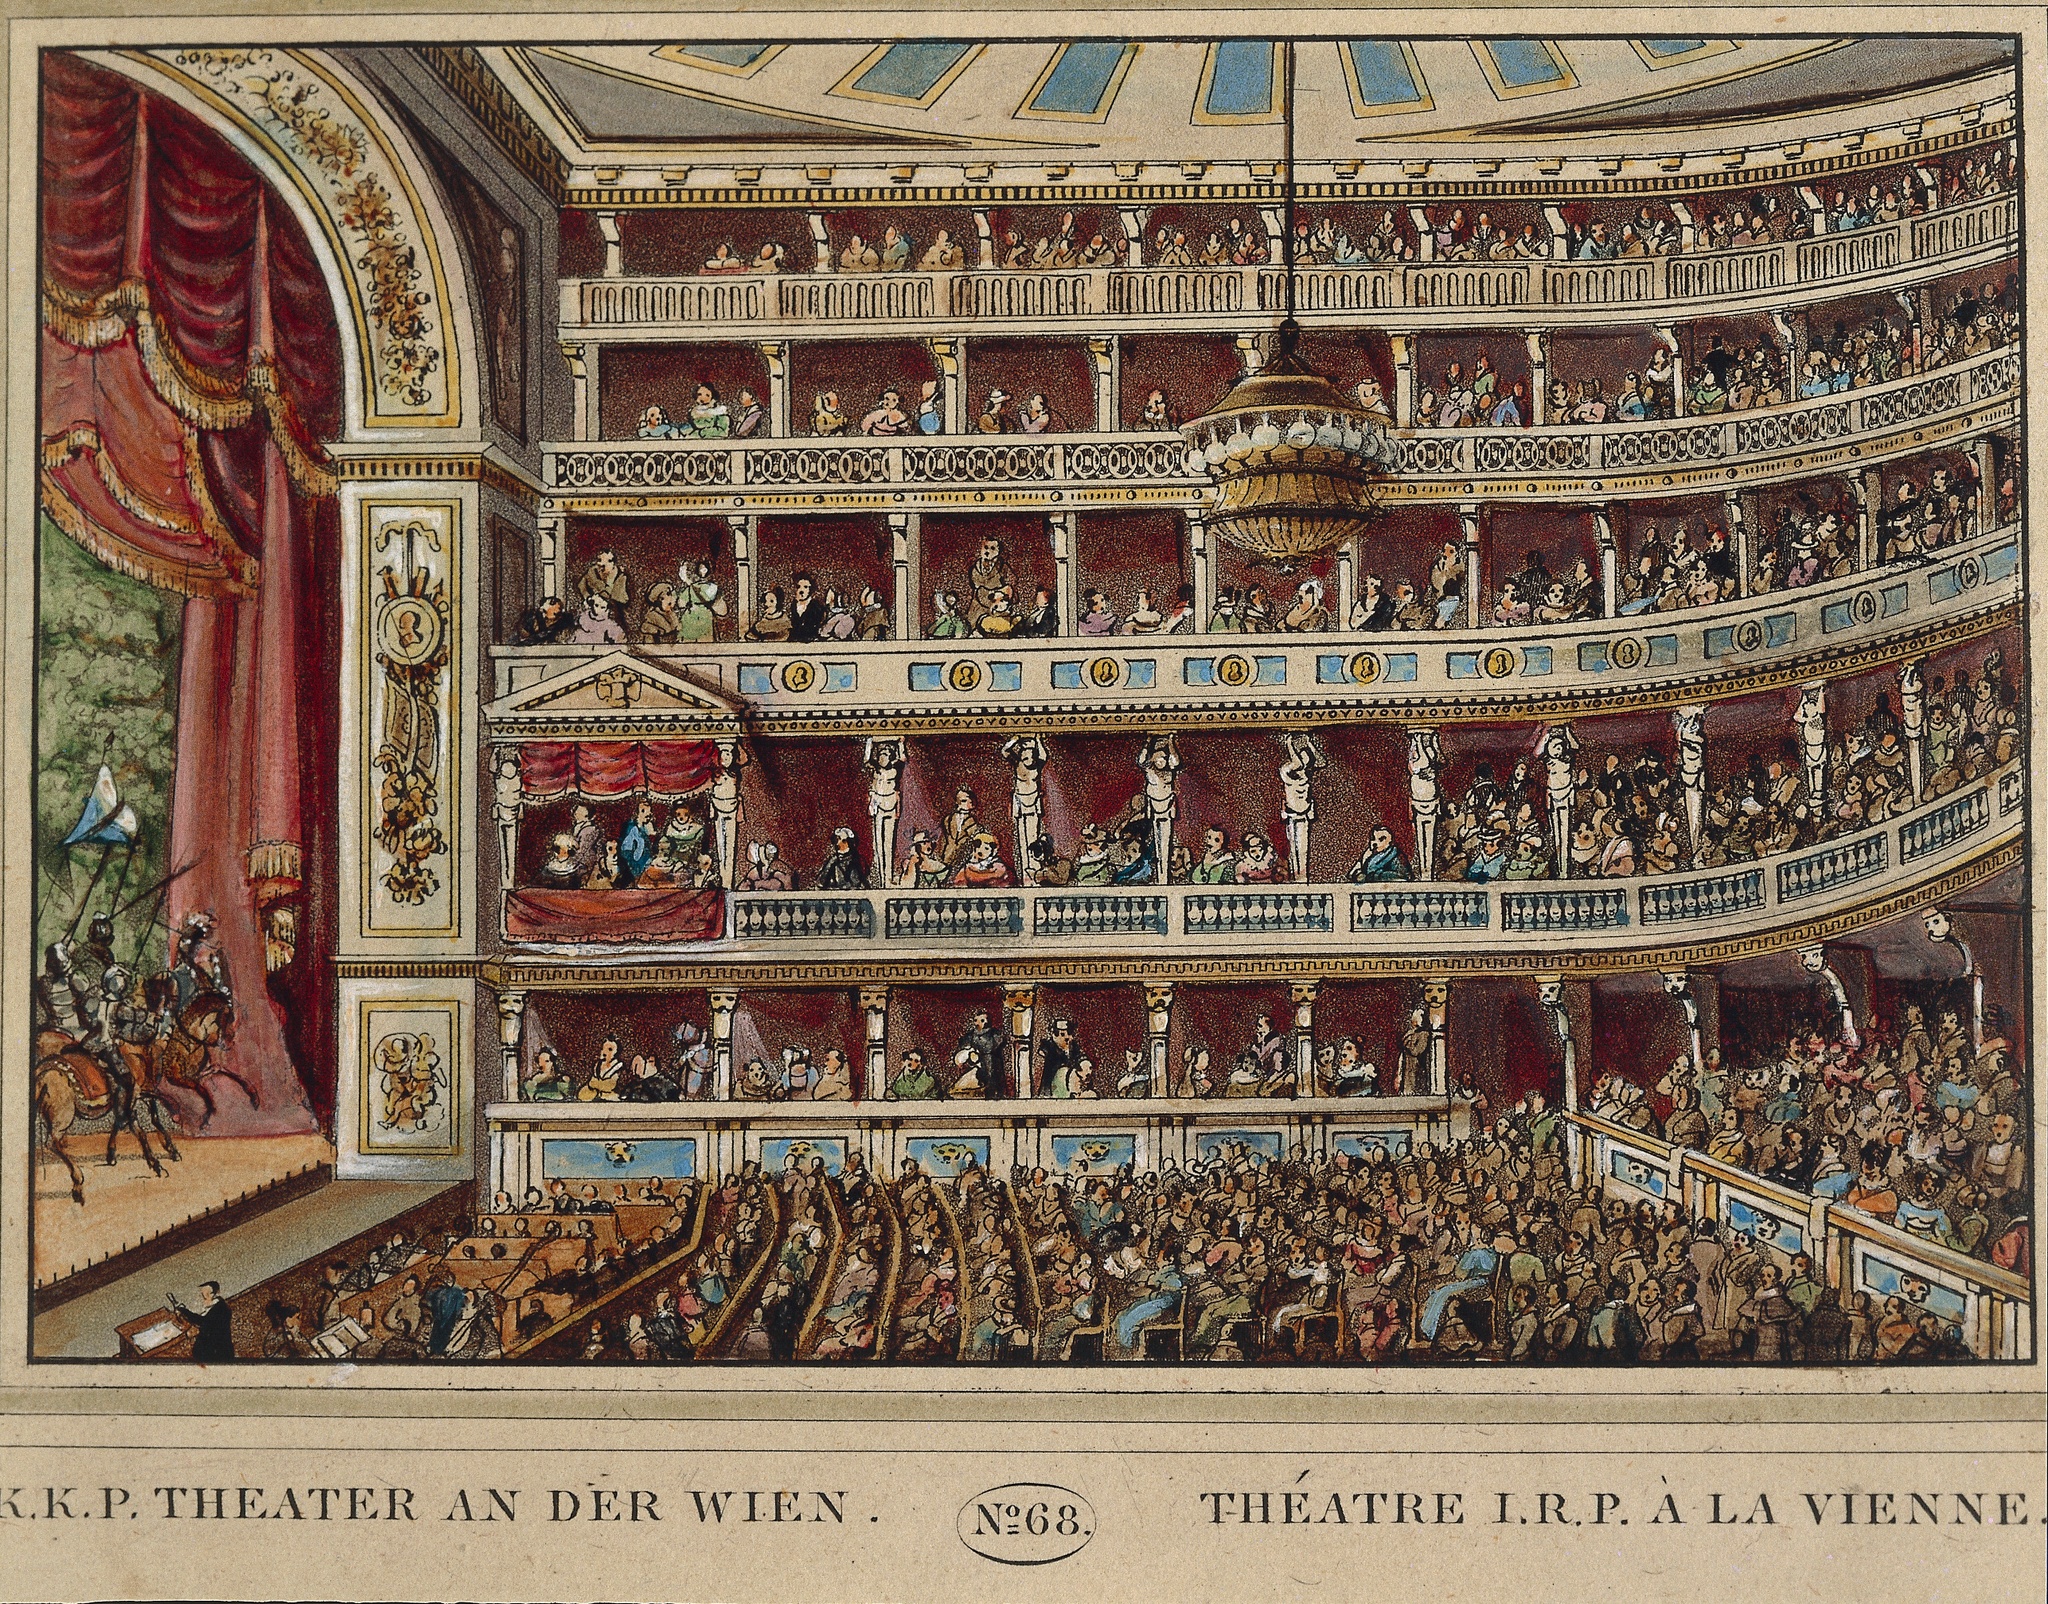 A cross-section illustration of an opera house depicting the stage and audience seated in different levels